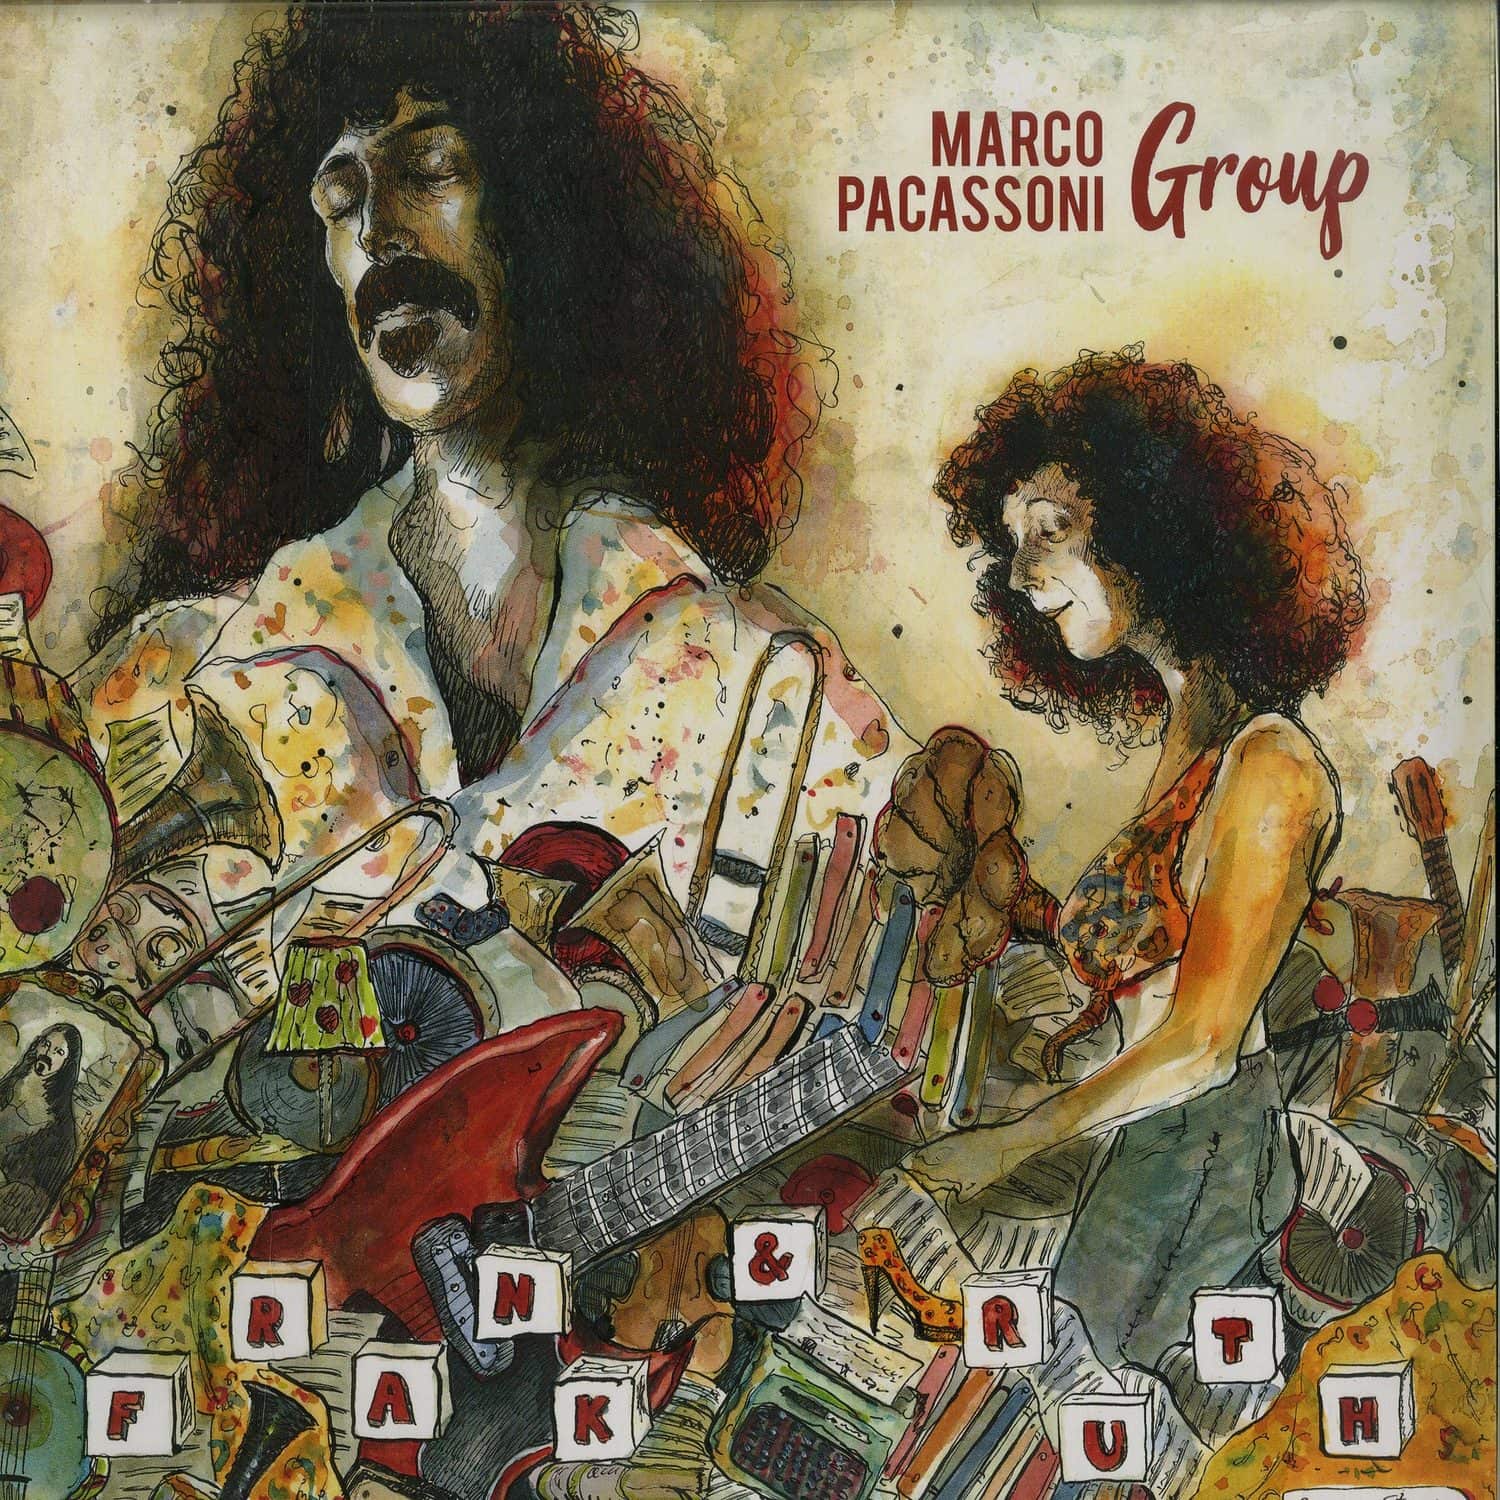 Marco Pacassoni Group - FRANK & RUTH 